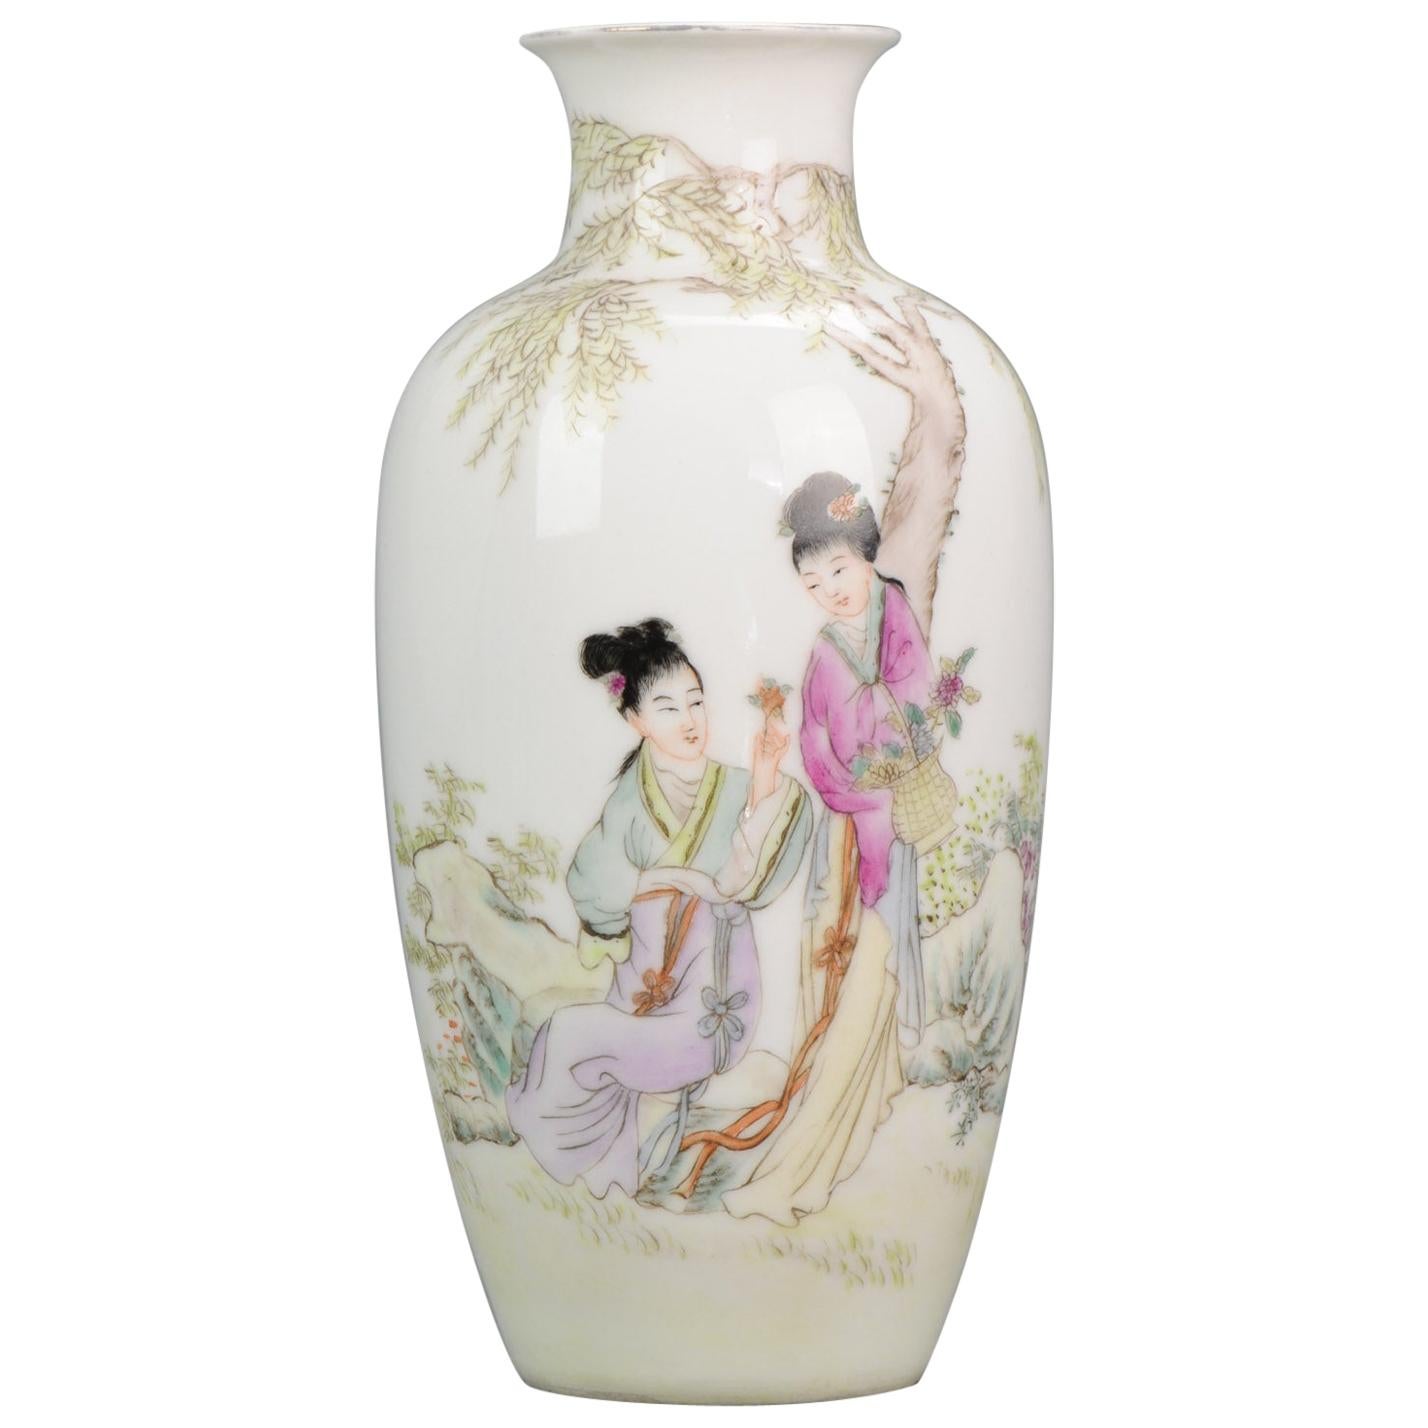 Lovely 20th Century PRoC Chinese Porcelain Vase with Ladies and Calligraphy